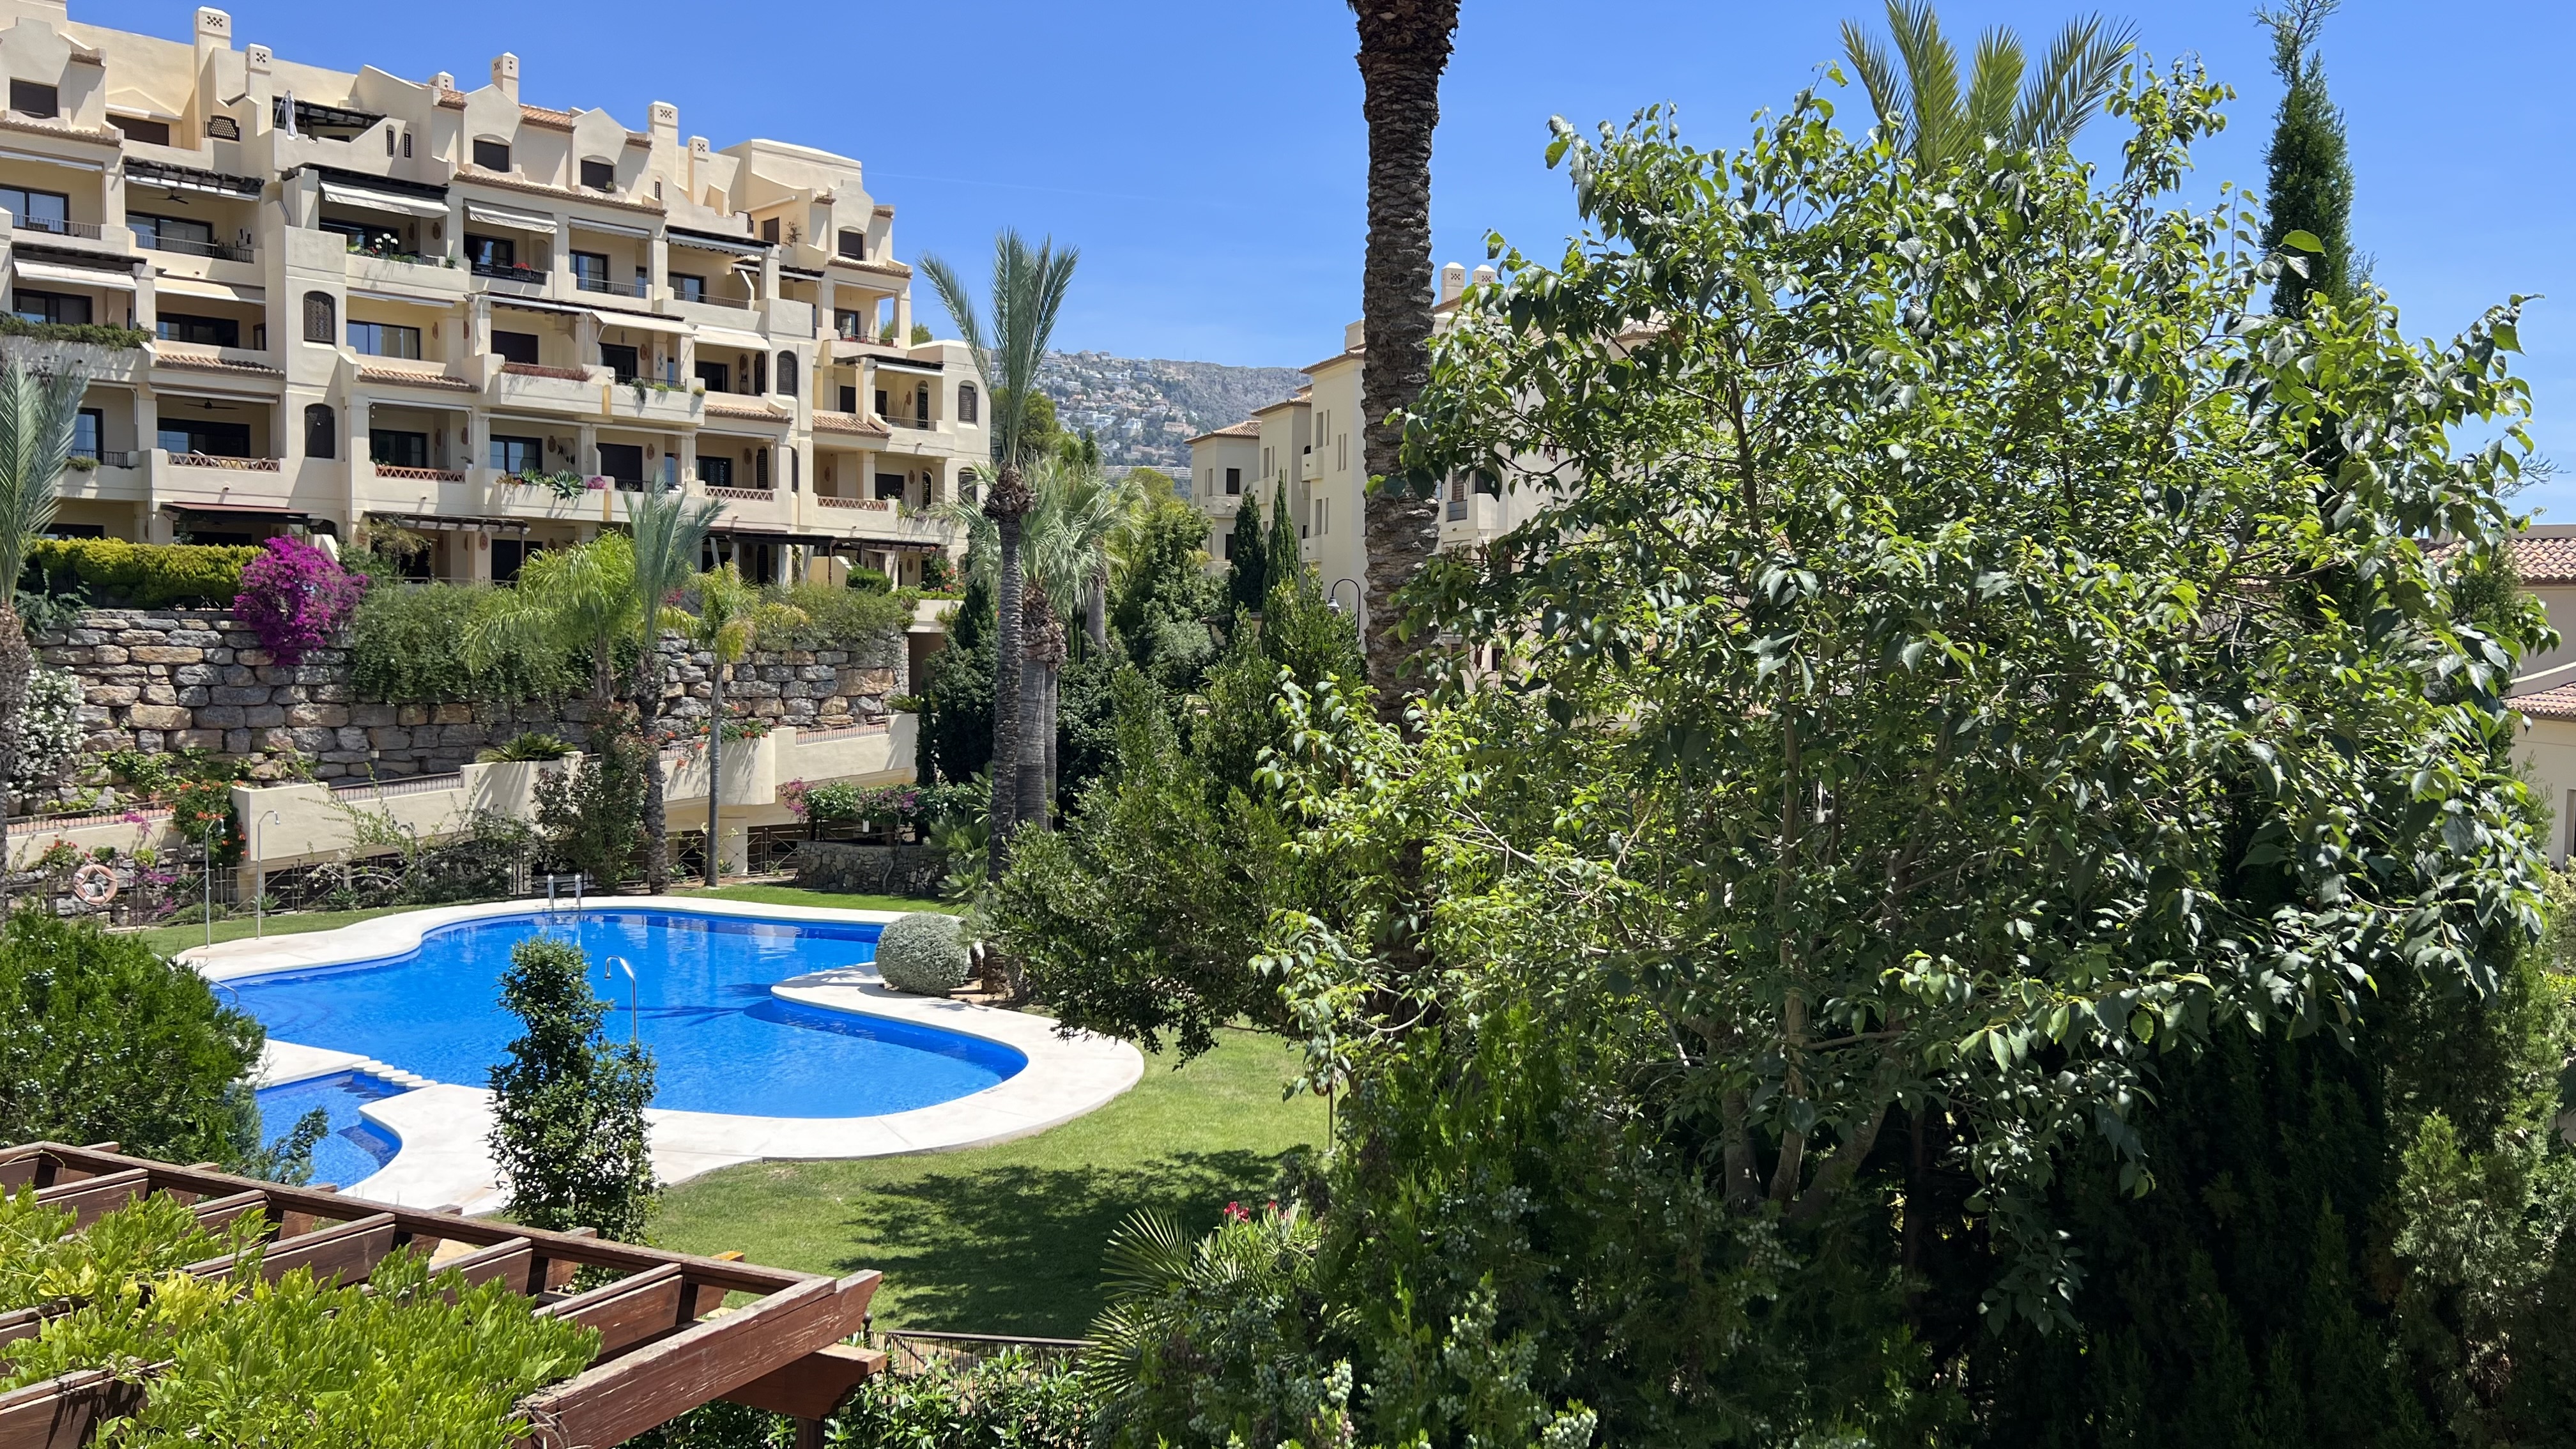 Apartment in Villa Gadea for sale with three bedrooms with a private garden. Communal swimming pool